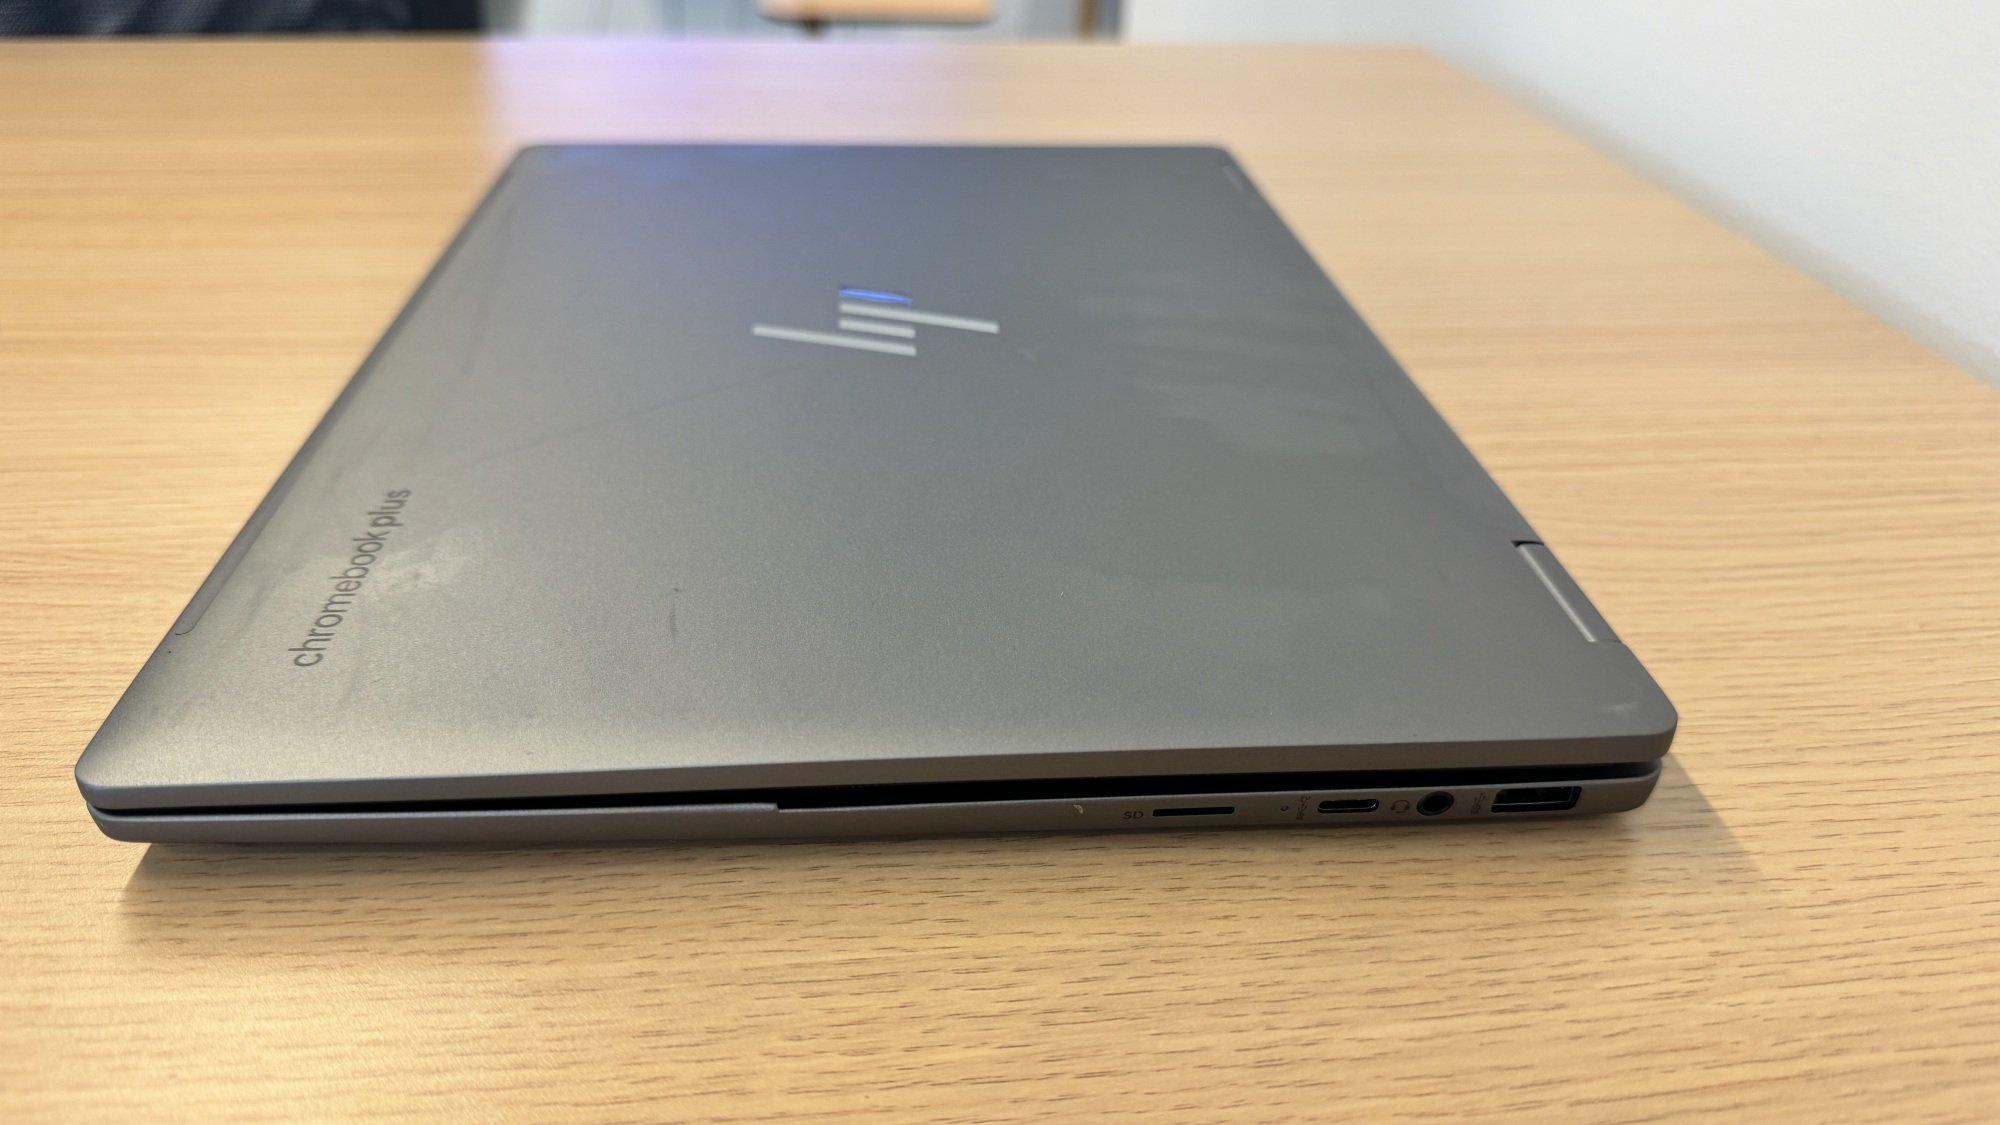 The lid of the HP Chromebook Plus x360 14c